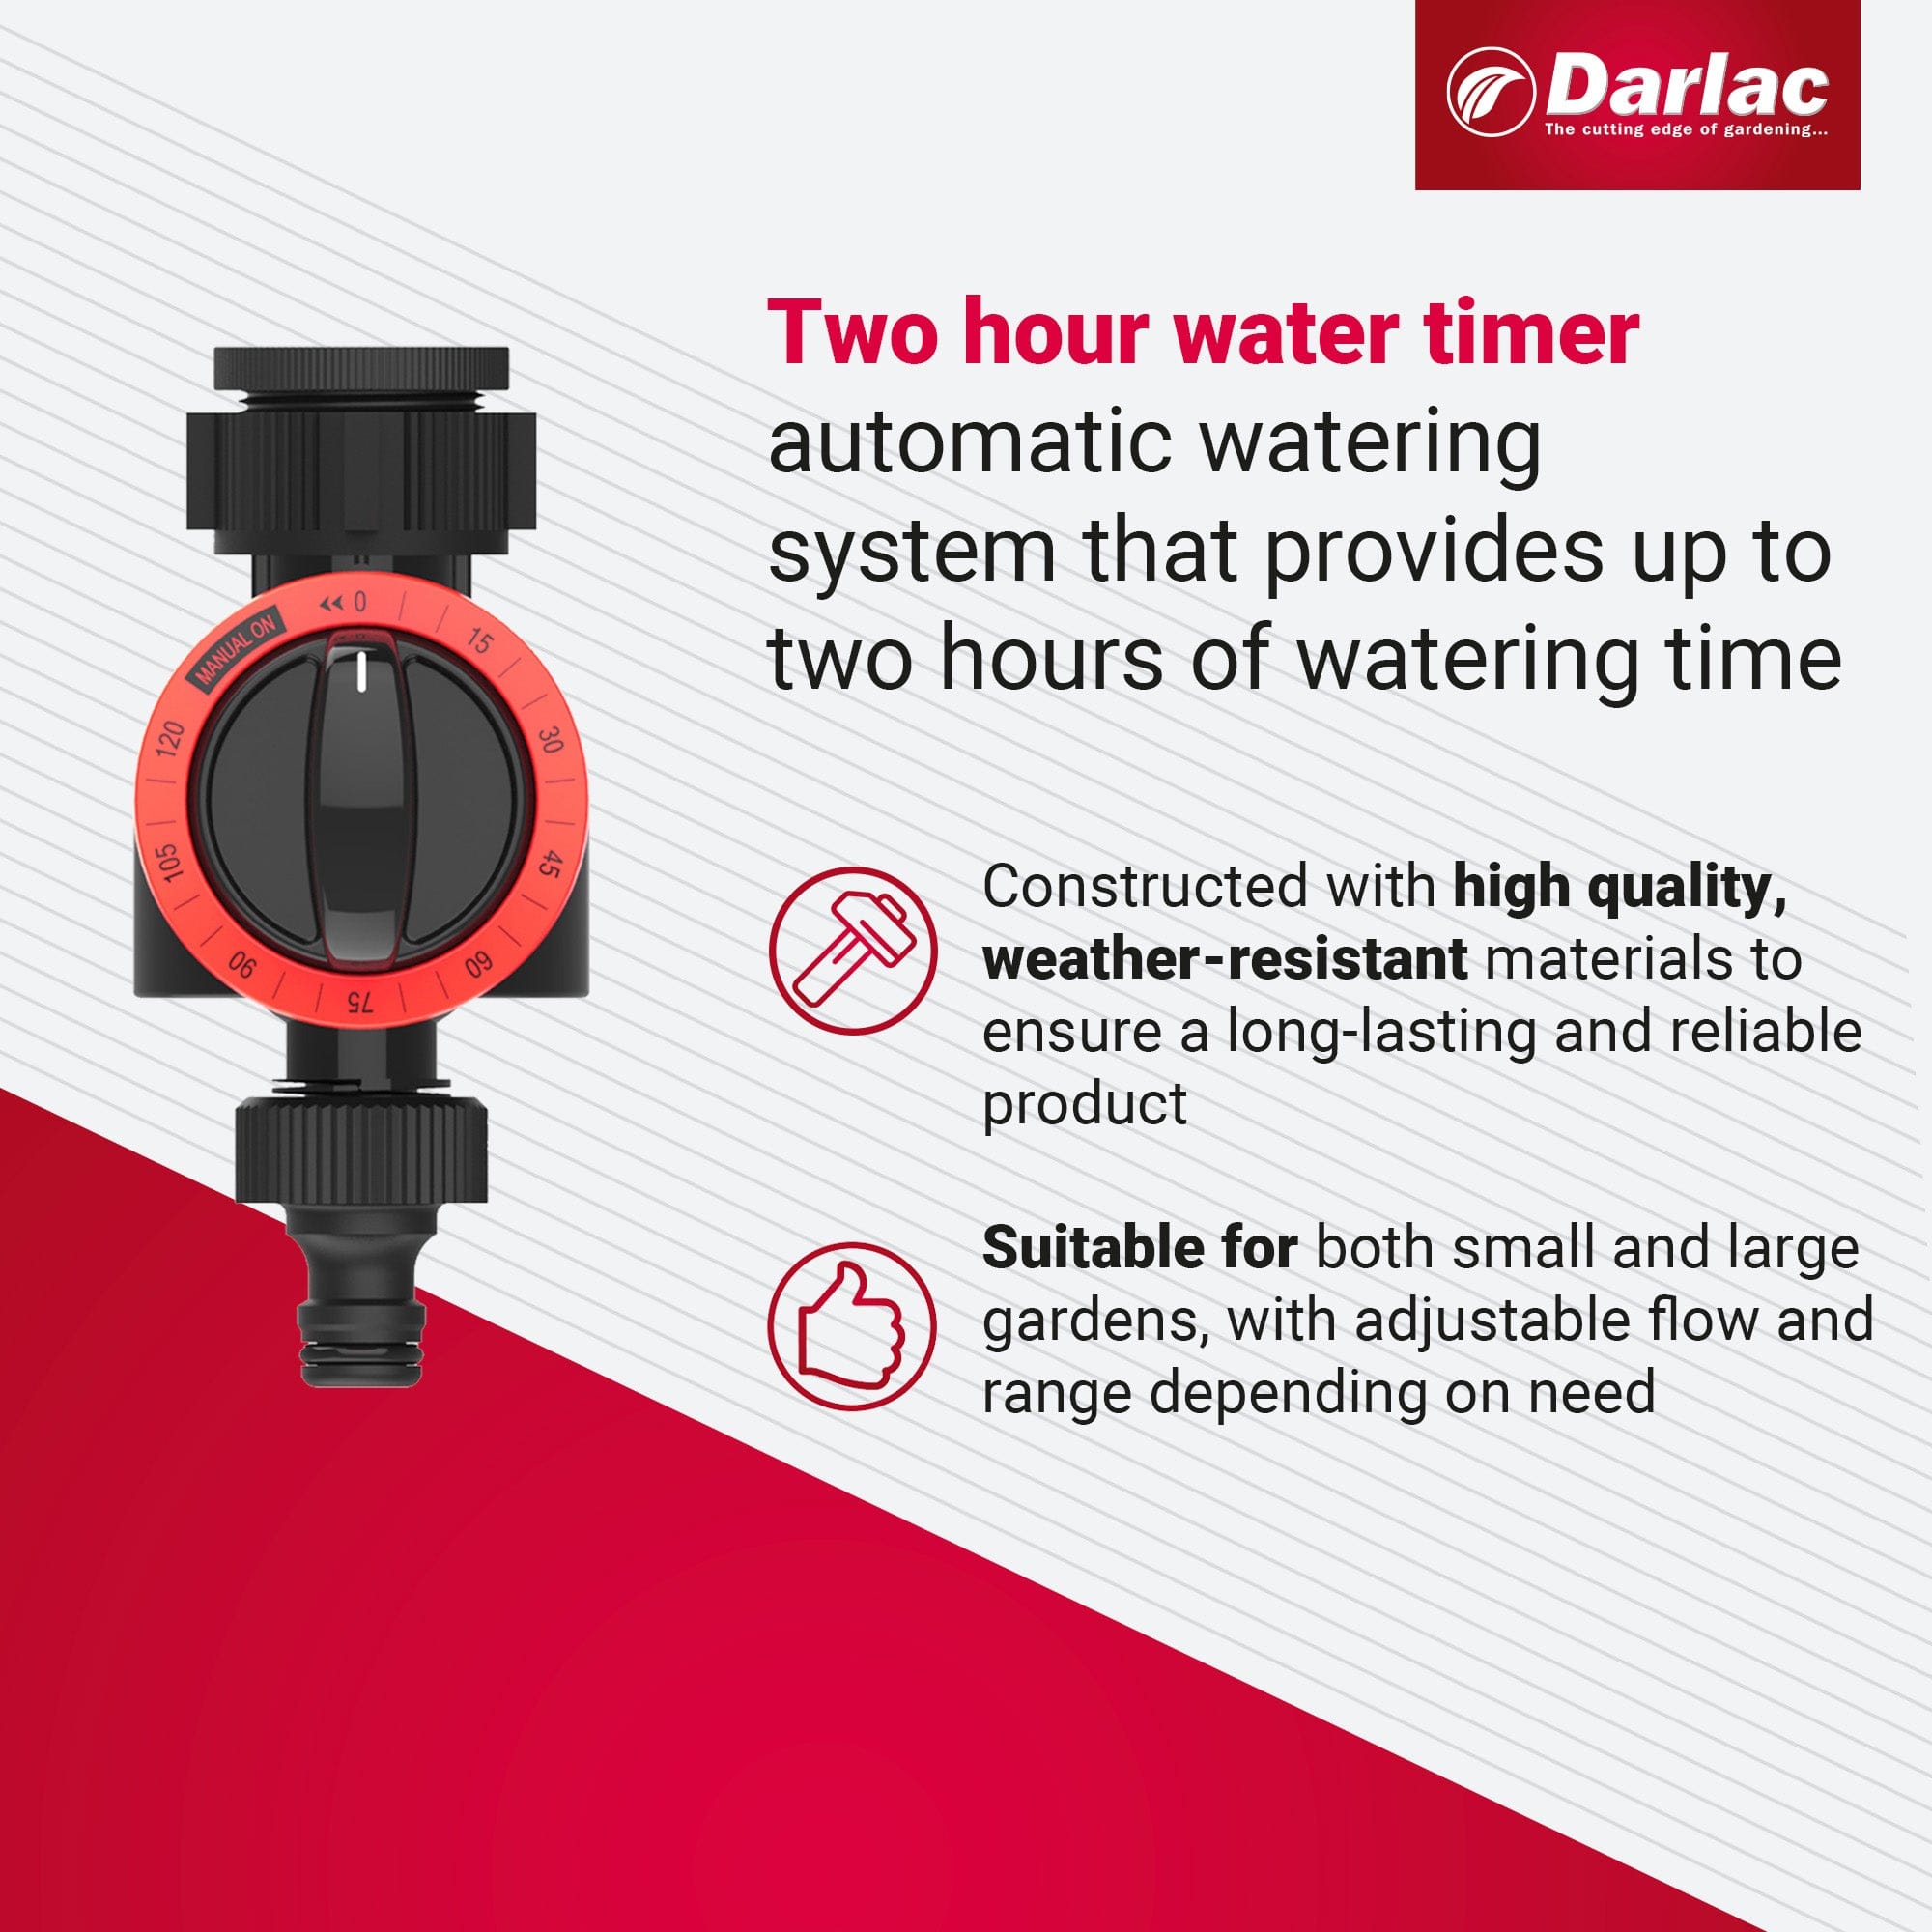 dt-brown HARDWARE Darlac Two Hour Water Timer